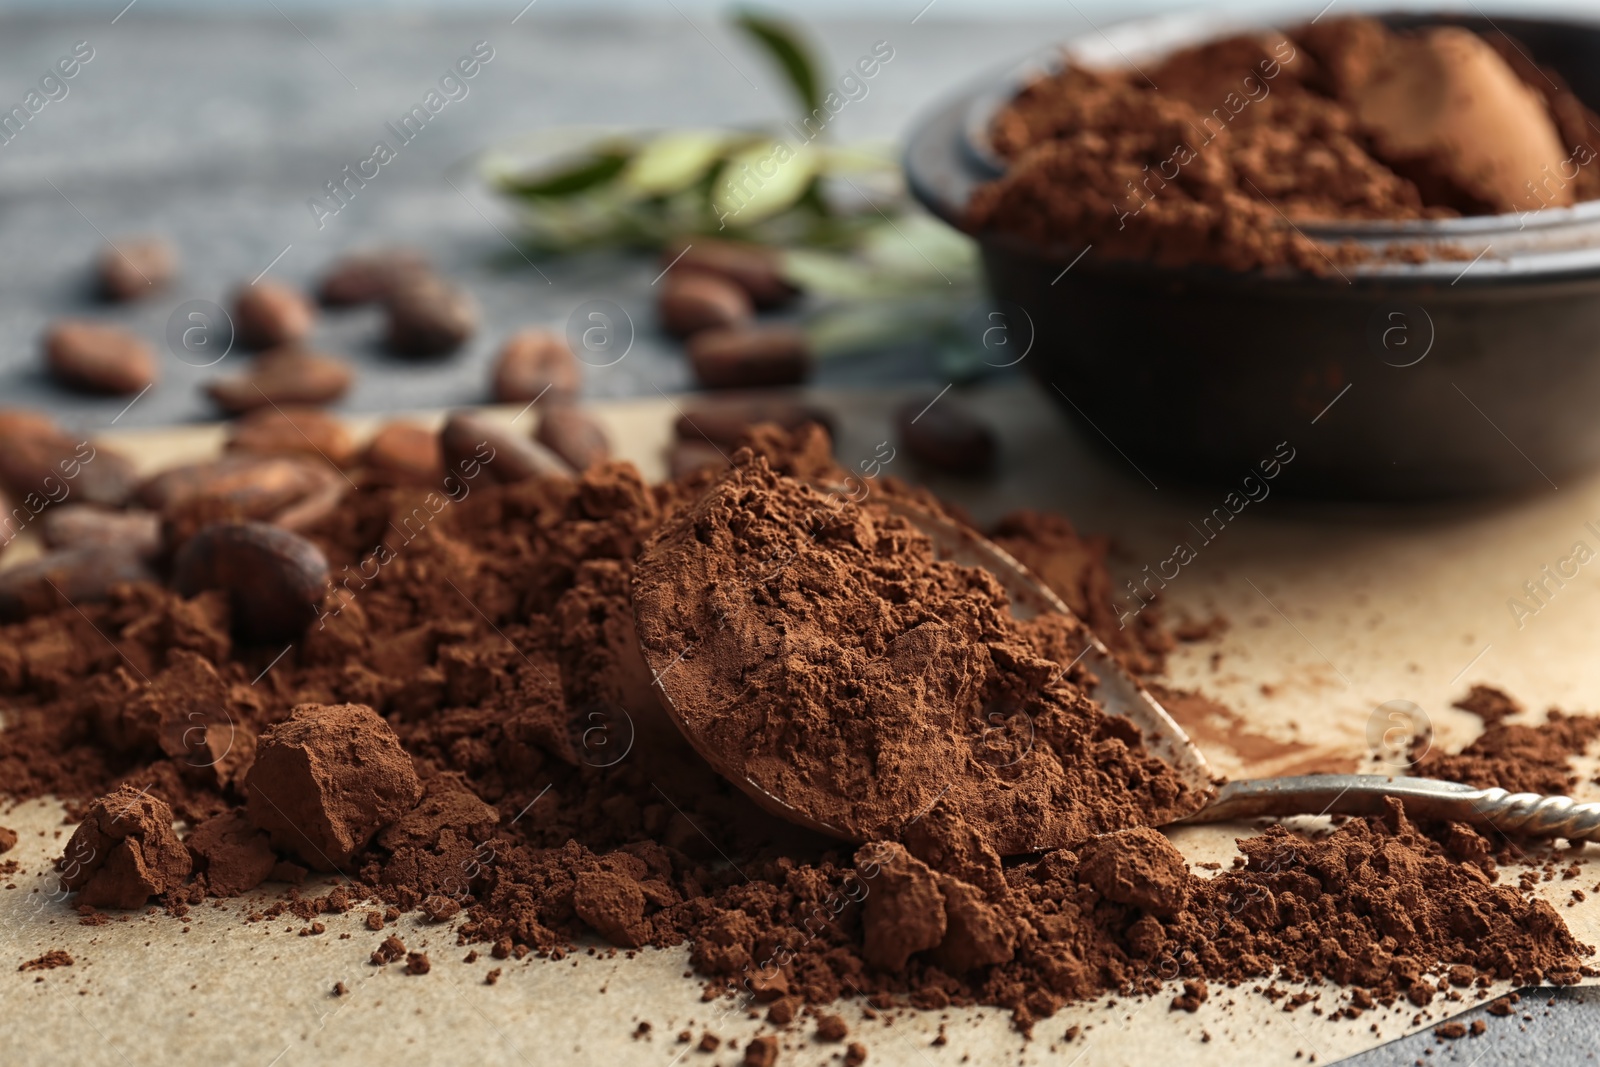 Photo of Spoon and pile of cocoa powder on table